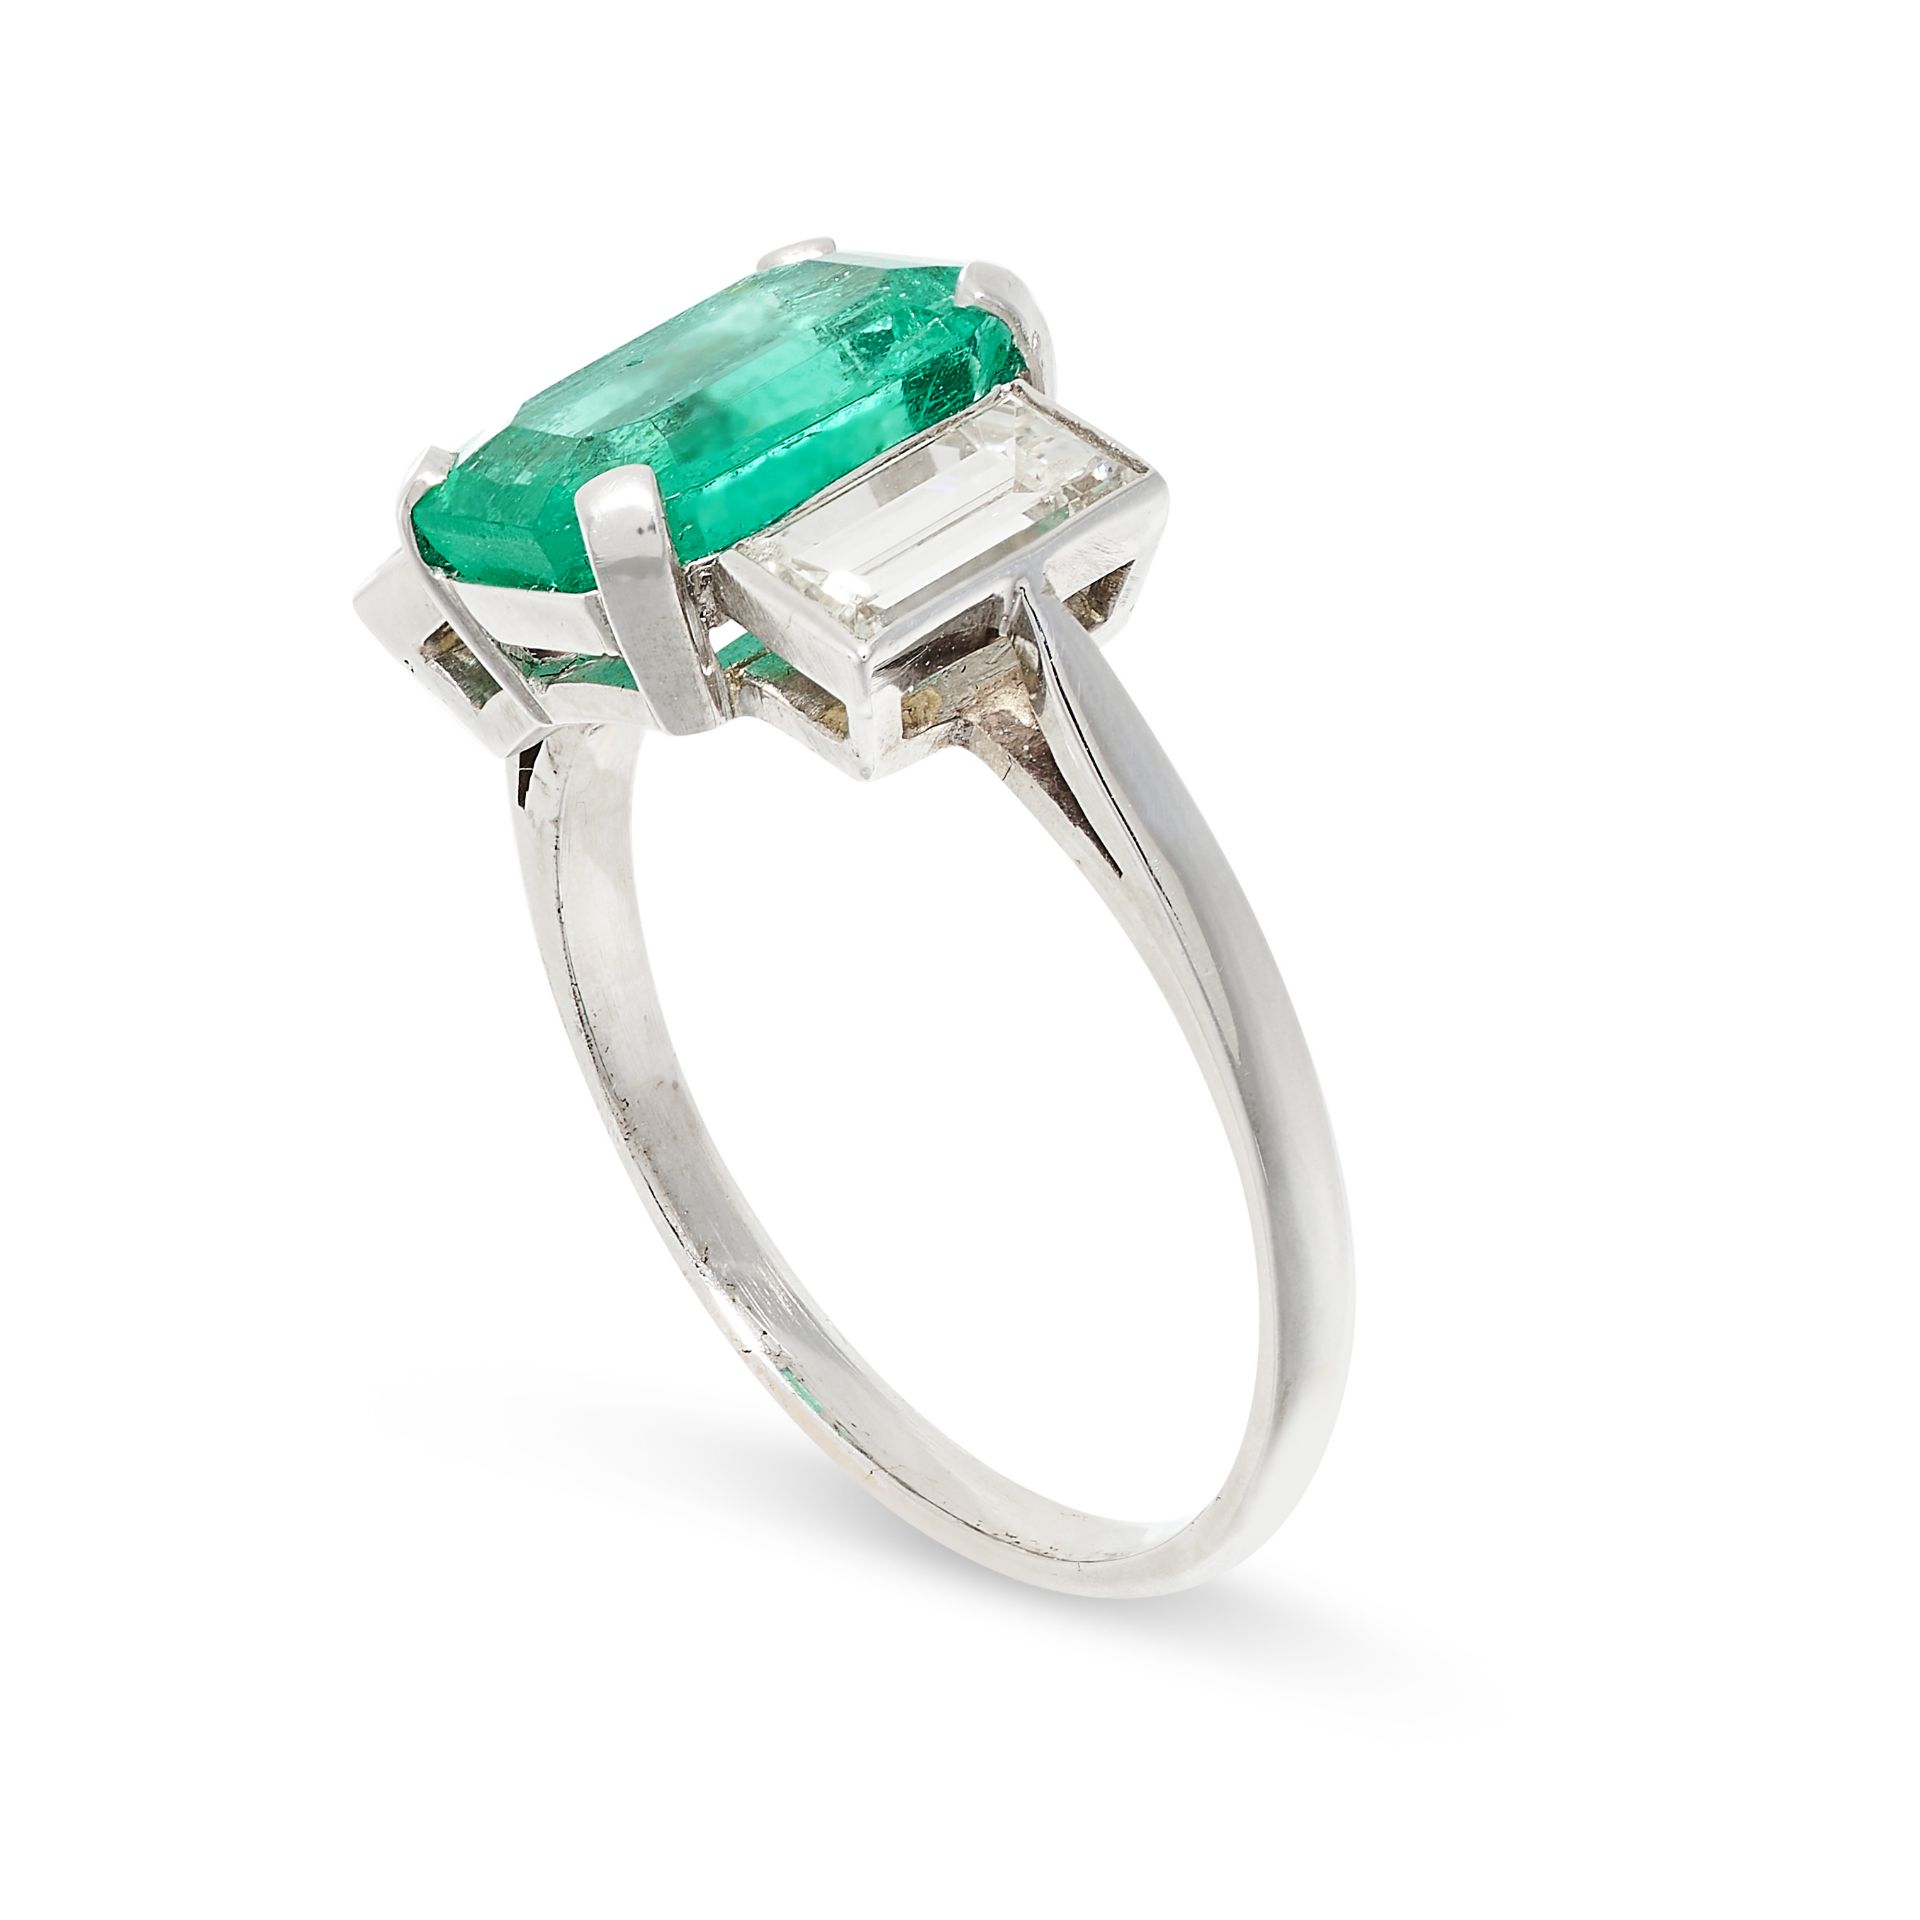 A COLOMBIAN EMERALD AND DIAMOND RING set with an emerald cut emerald of 2.39 carats, between two - Bild 2 aus 2